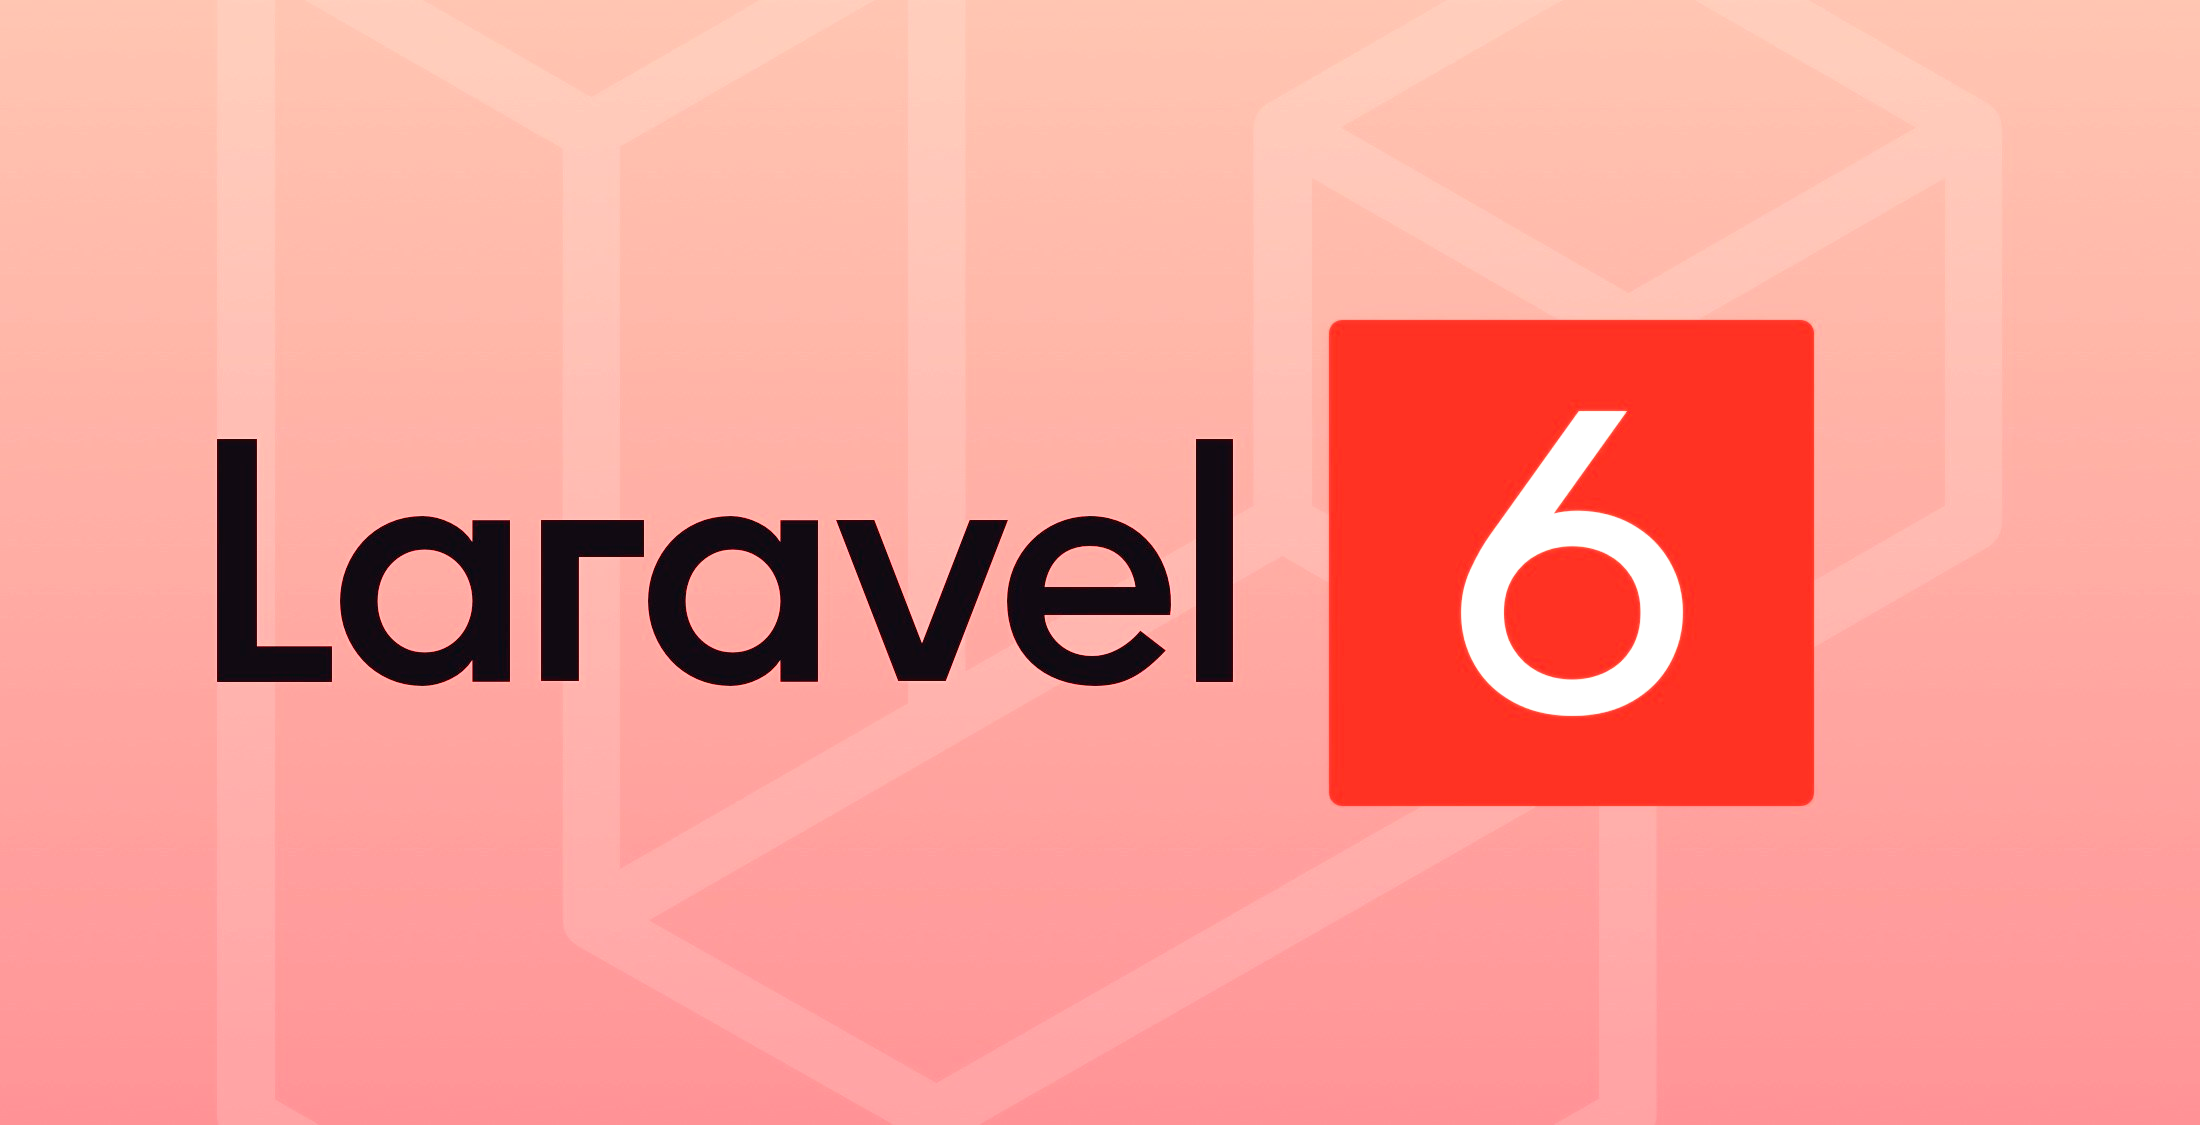 upload multiple images in laravel 6 with ajax